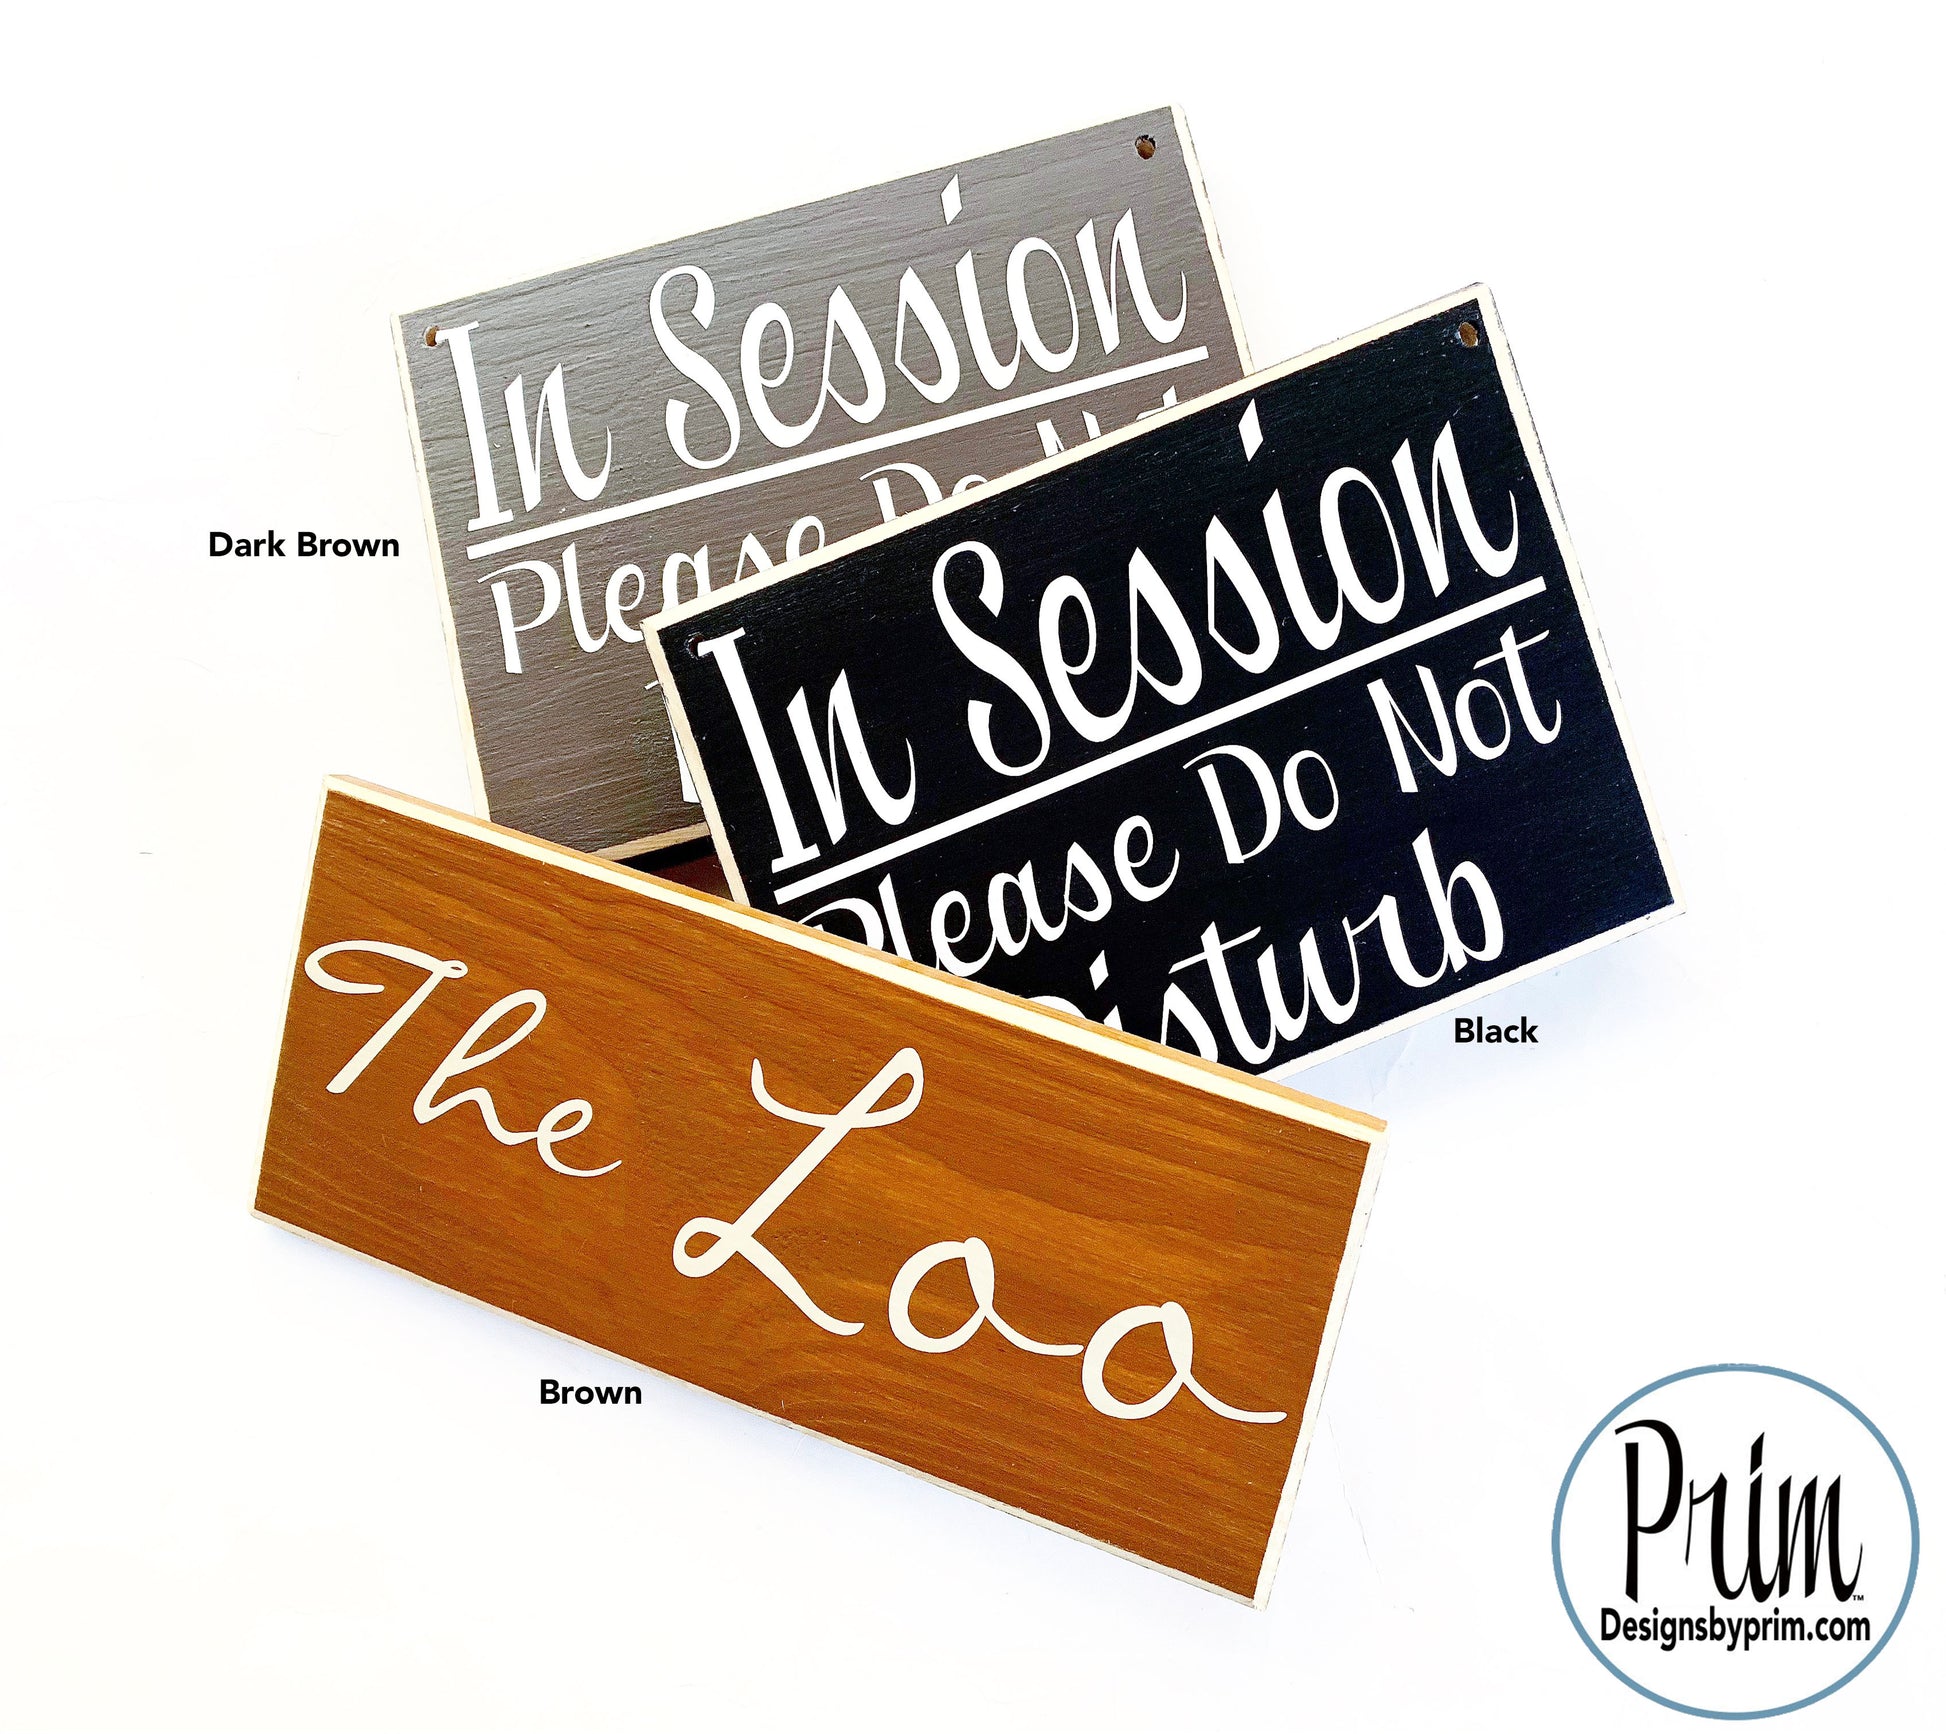 Designs by Prim 8x6 Lash Room Number Custom Wood Sign Extensions Welcome Office Spa Eyelash Eyebrow Relaxation Meditation Brow Waiting Room Wall Door Plaque